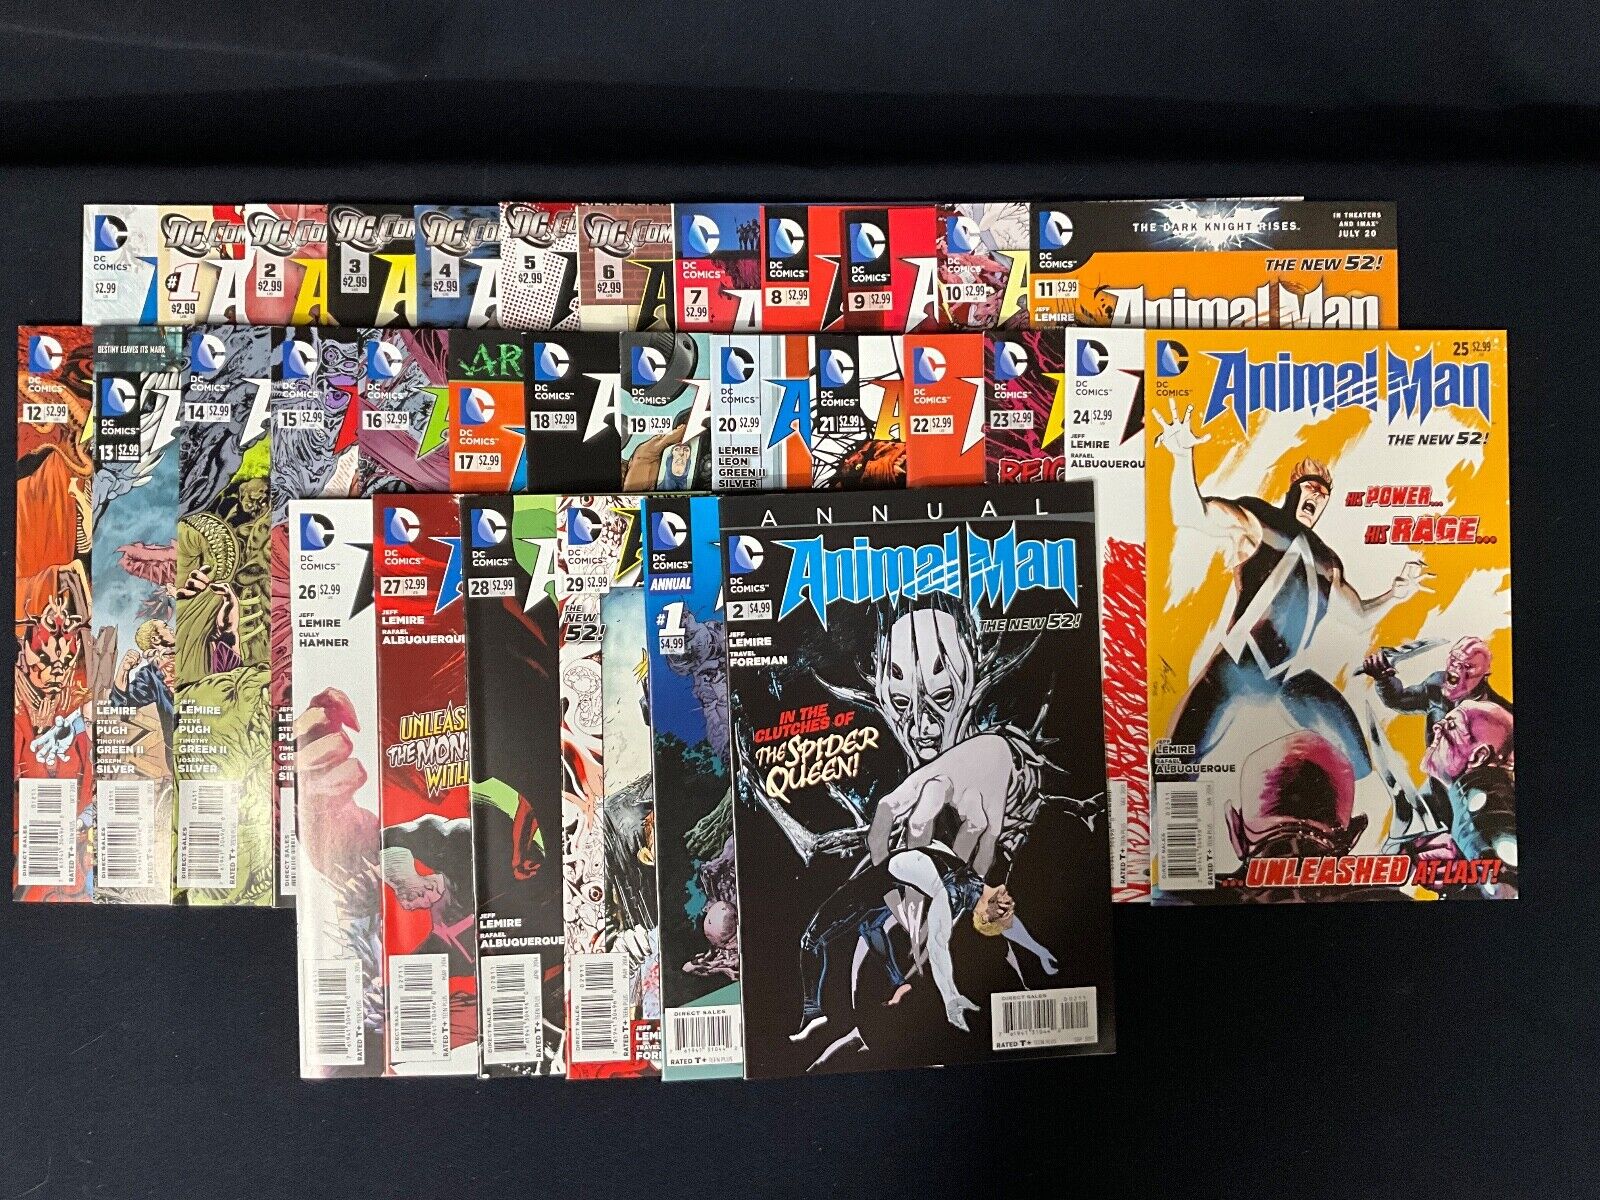 Animal Man vol. 2 #0-29, Annuals 1-2, Complete DC New 52 Series, 32 total books